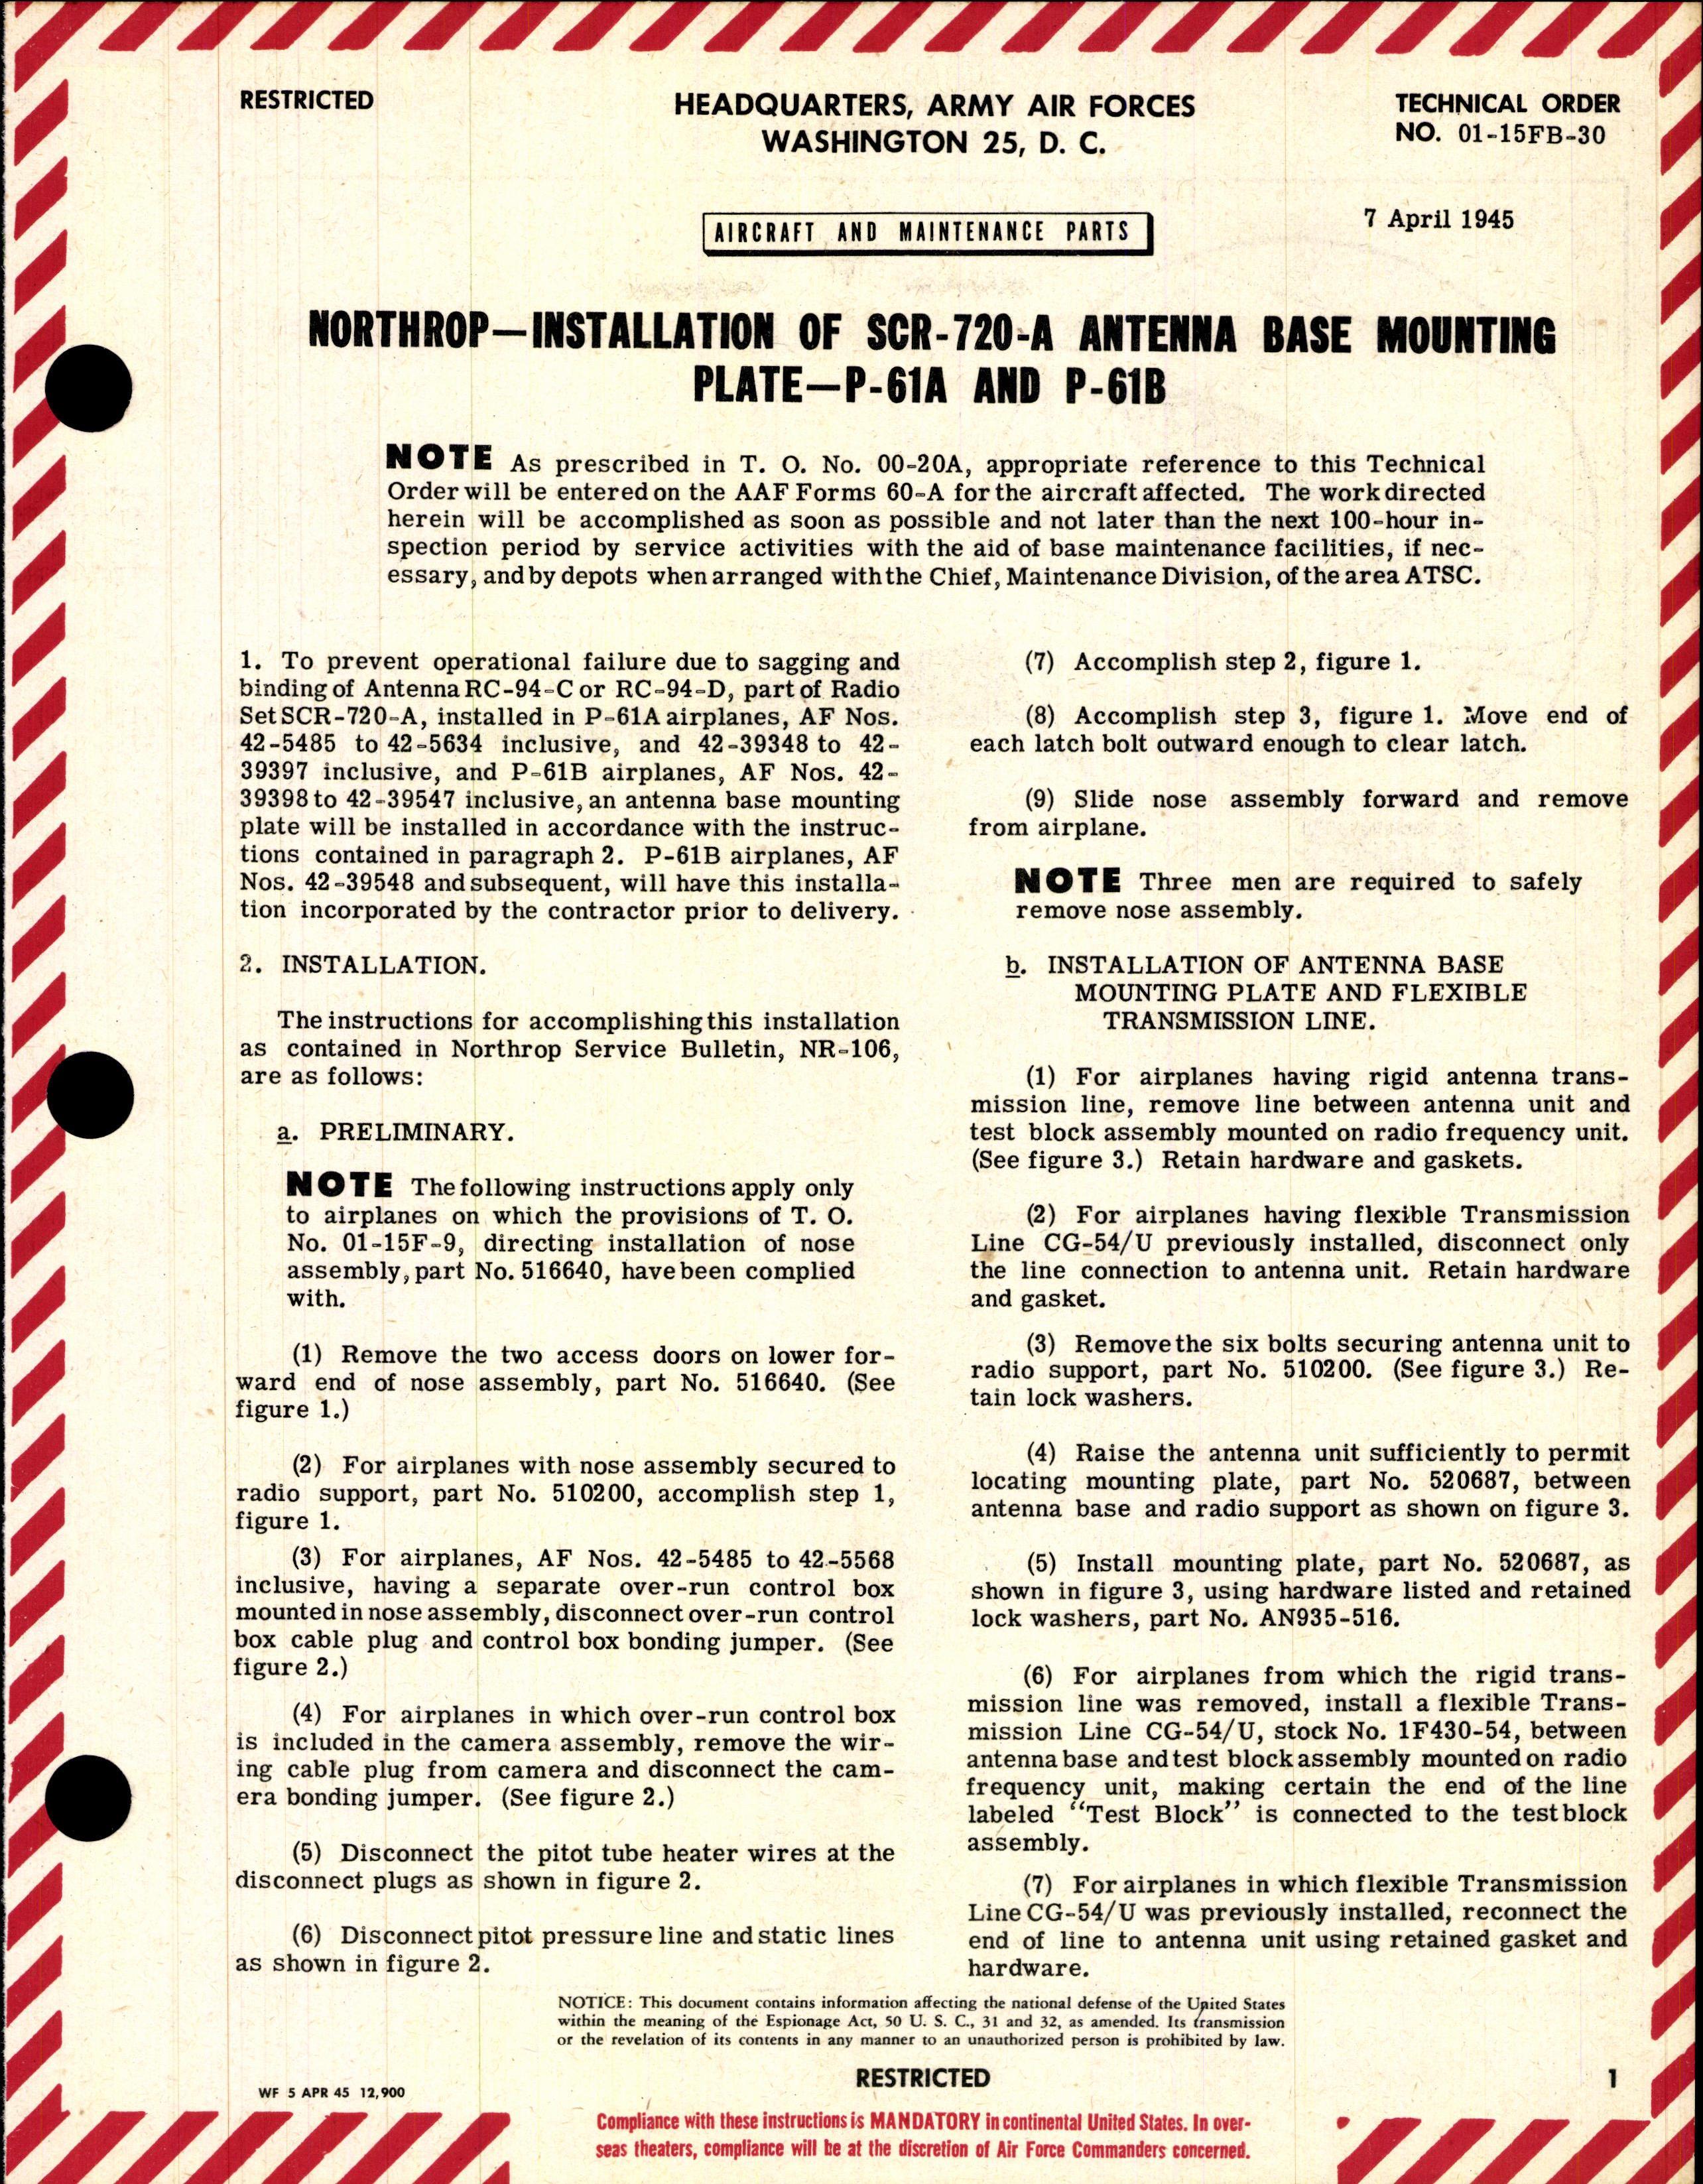 Sample page 1 from AirCorps Library document: Installation of SCR-750-A Antenna Base Mounting Plate for P-61A and P-61B